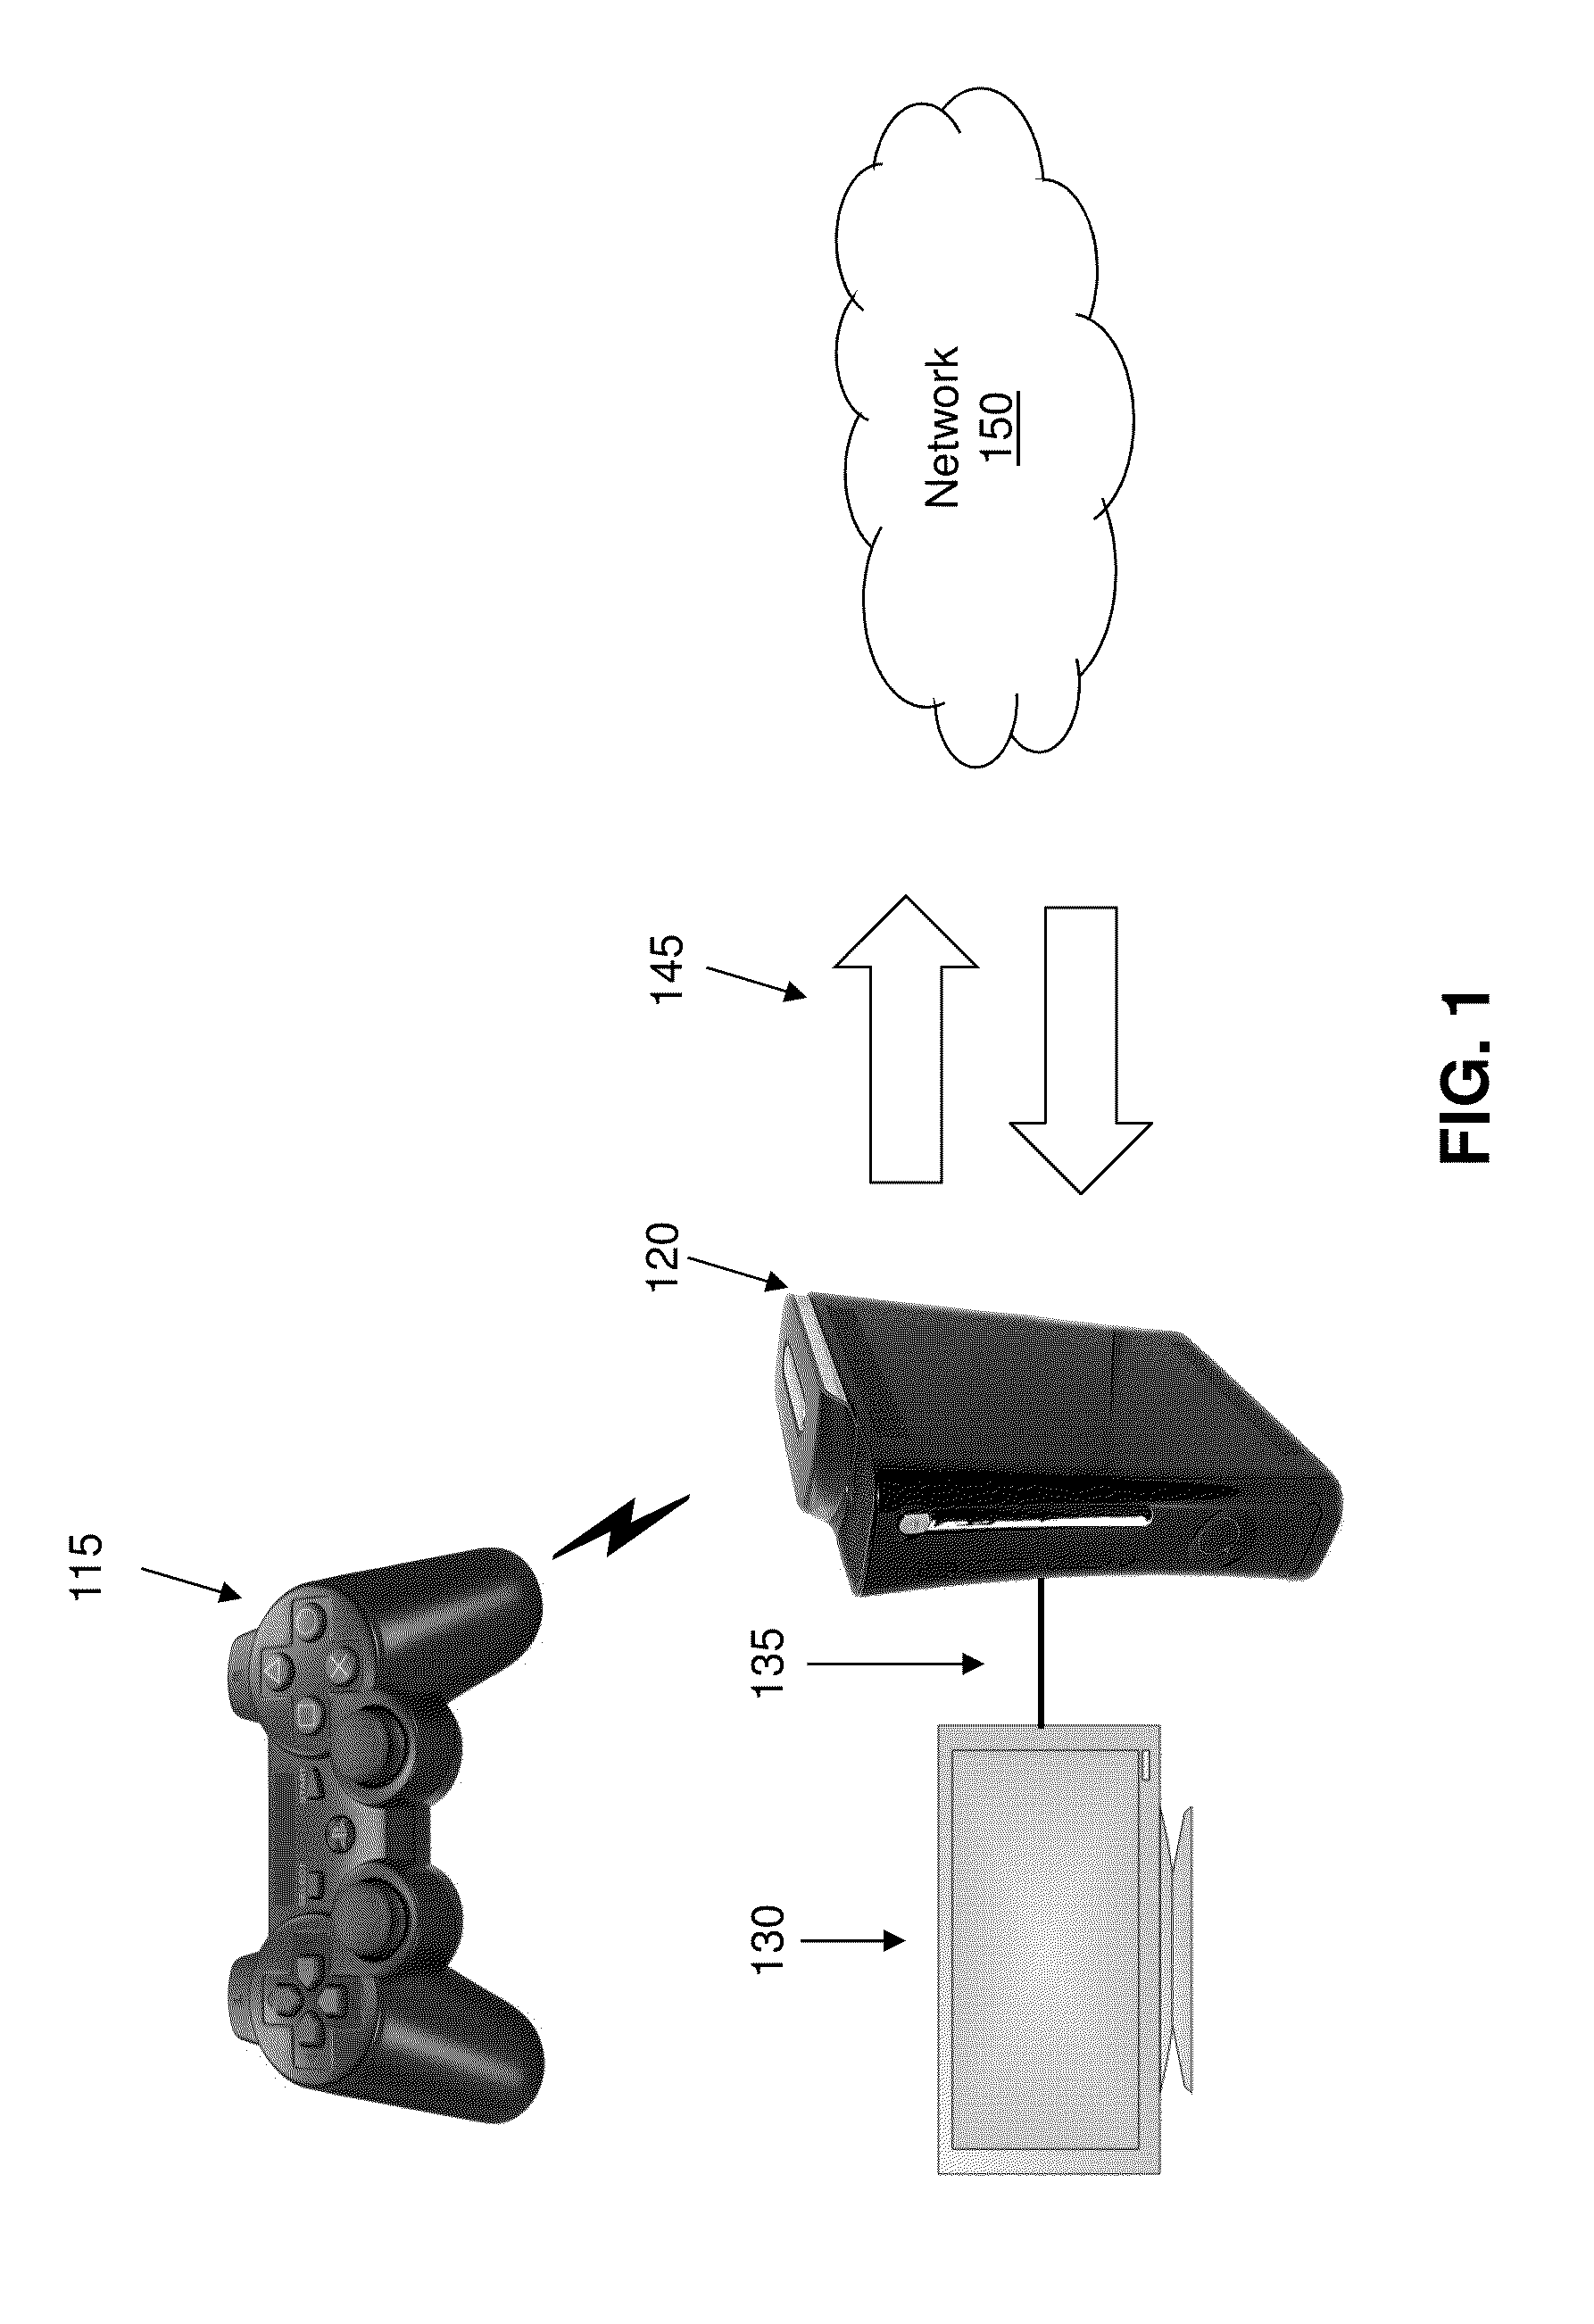 Method and apparatus for monitoring and calibrating performances of gamers